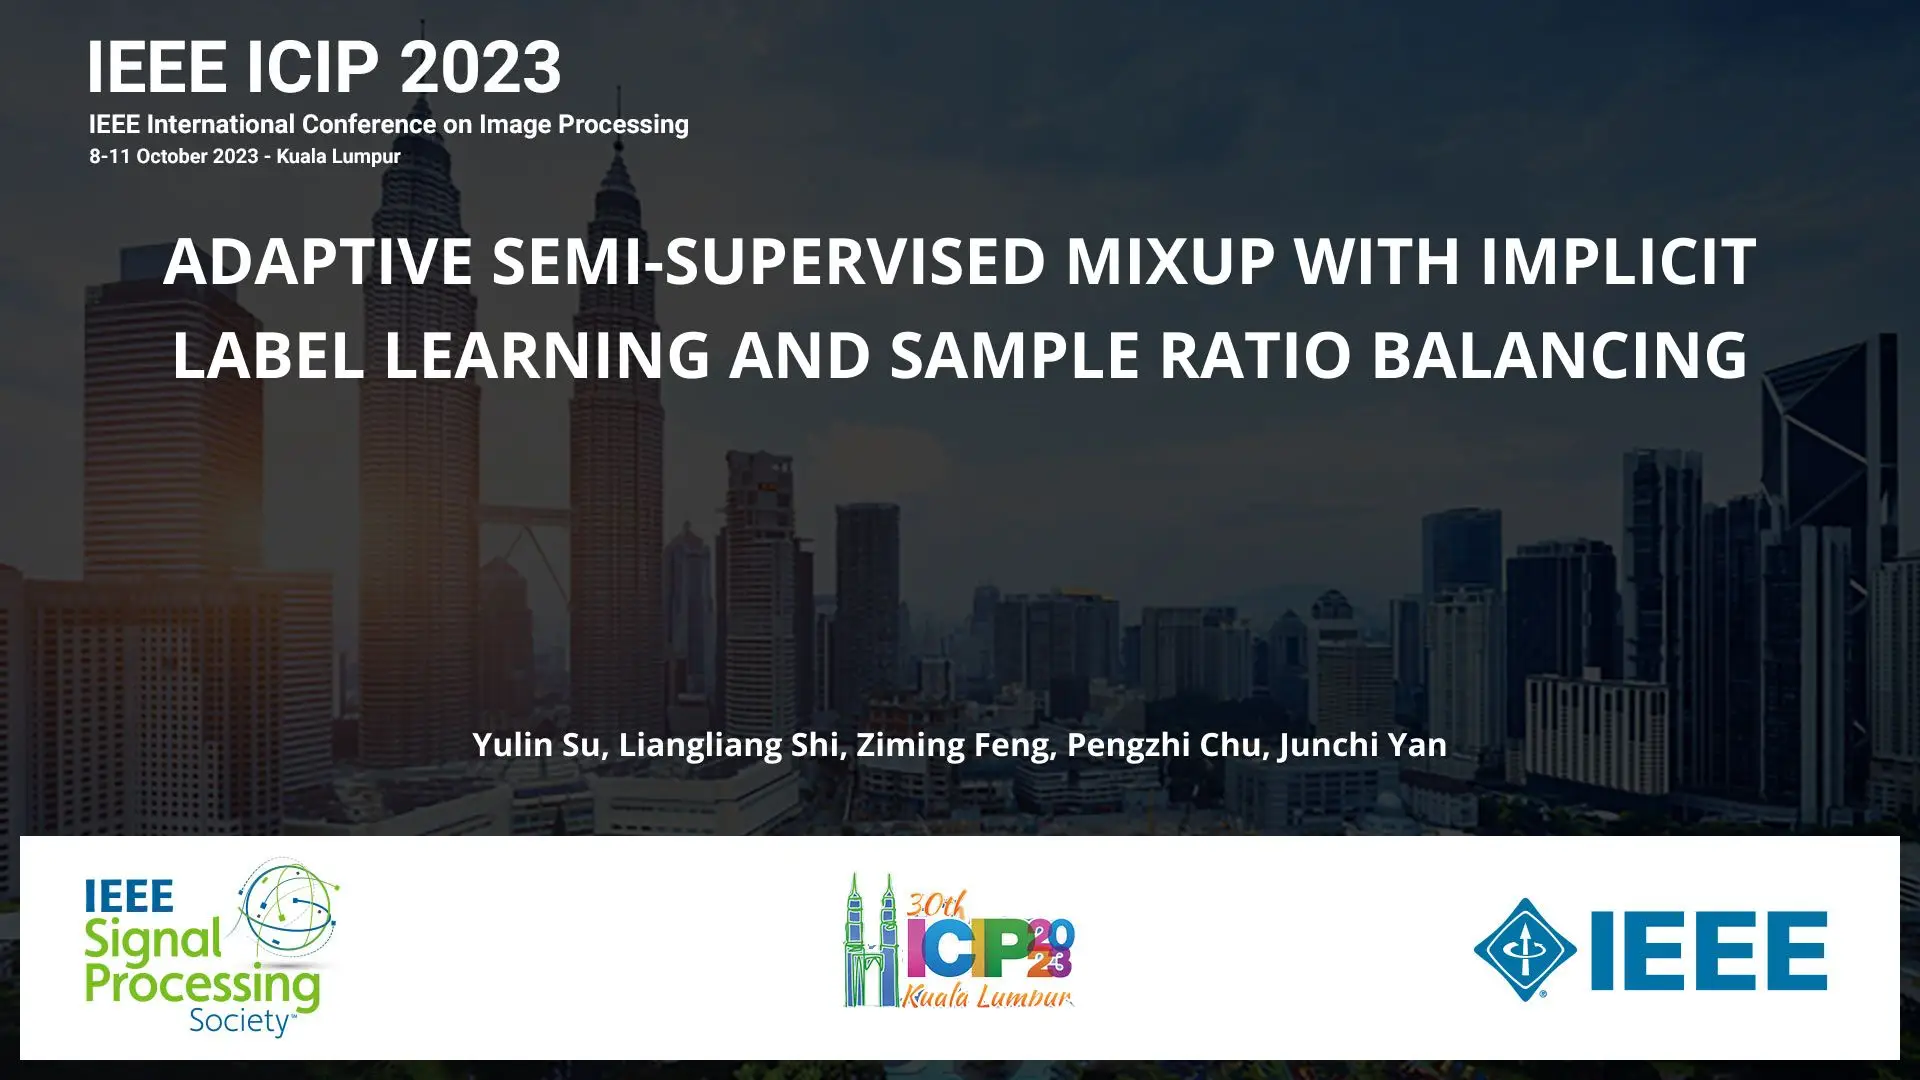 ADAPTIVE SEMI-SUPERVISED MIXUP WITH IMPLICIT LABEL LEARNING AND SAMPLE RATIO BALANCING